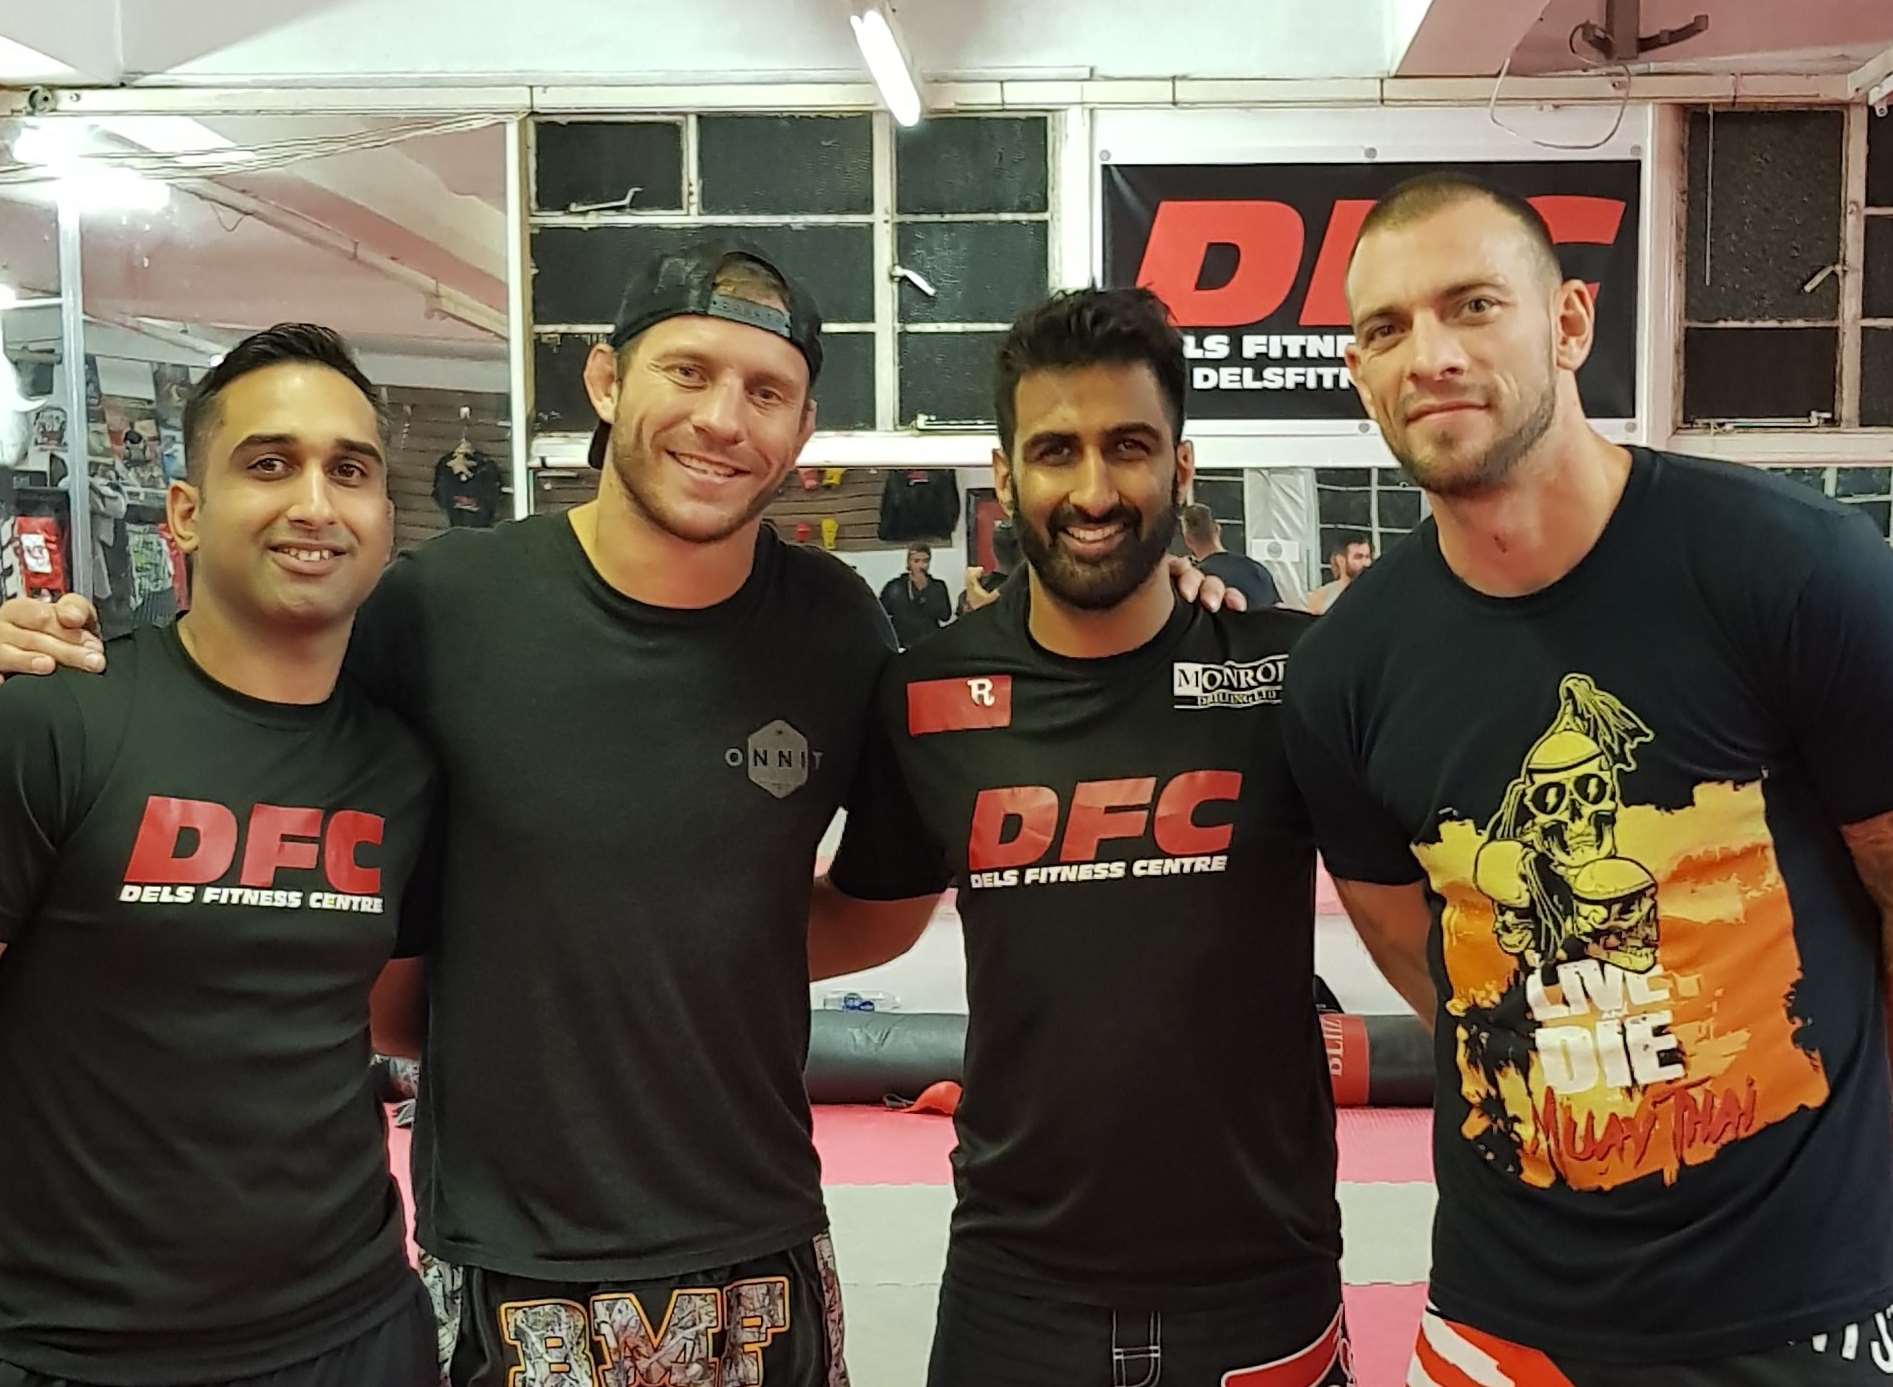 From left Danny Dhell, Donald Cerrone, Ricky Dhell and Joe Schilling